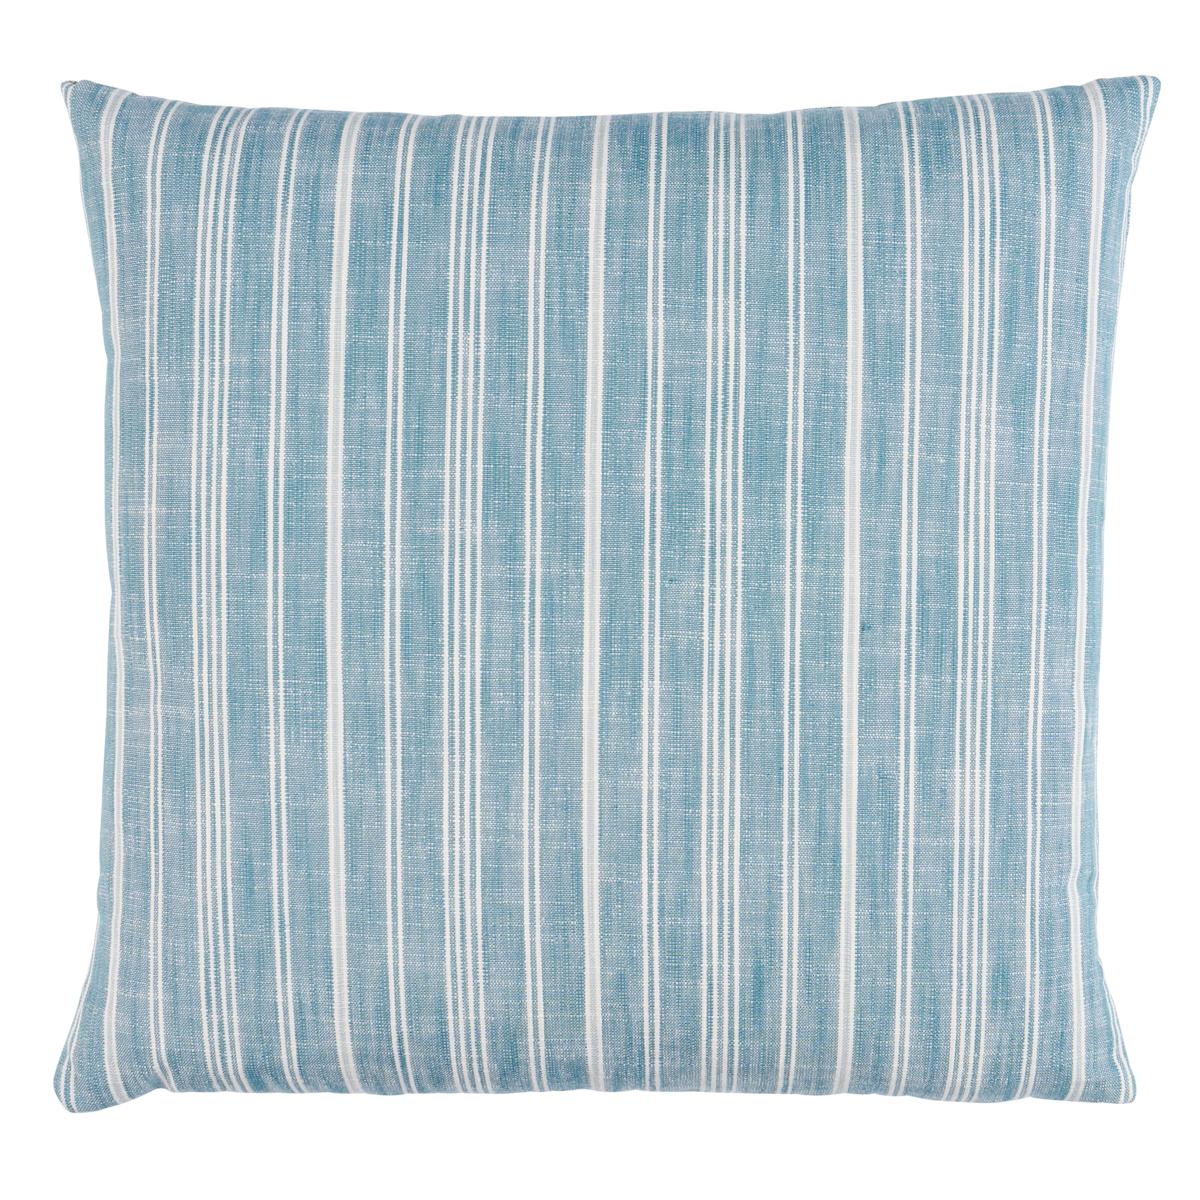 Lucy Stripe Pillow in Indigo 22 x 22" For Sale